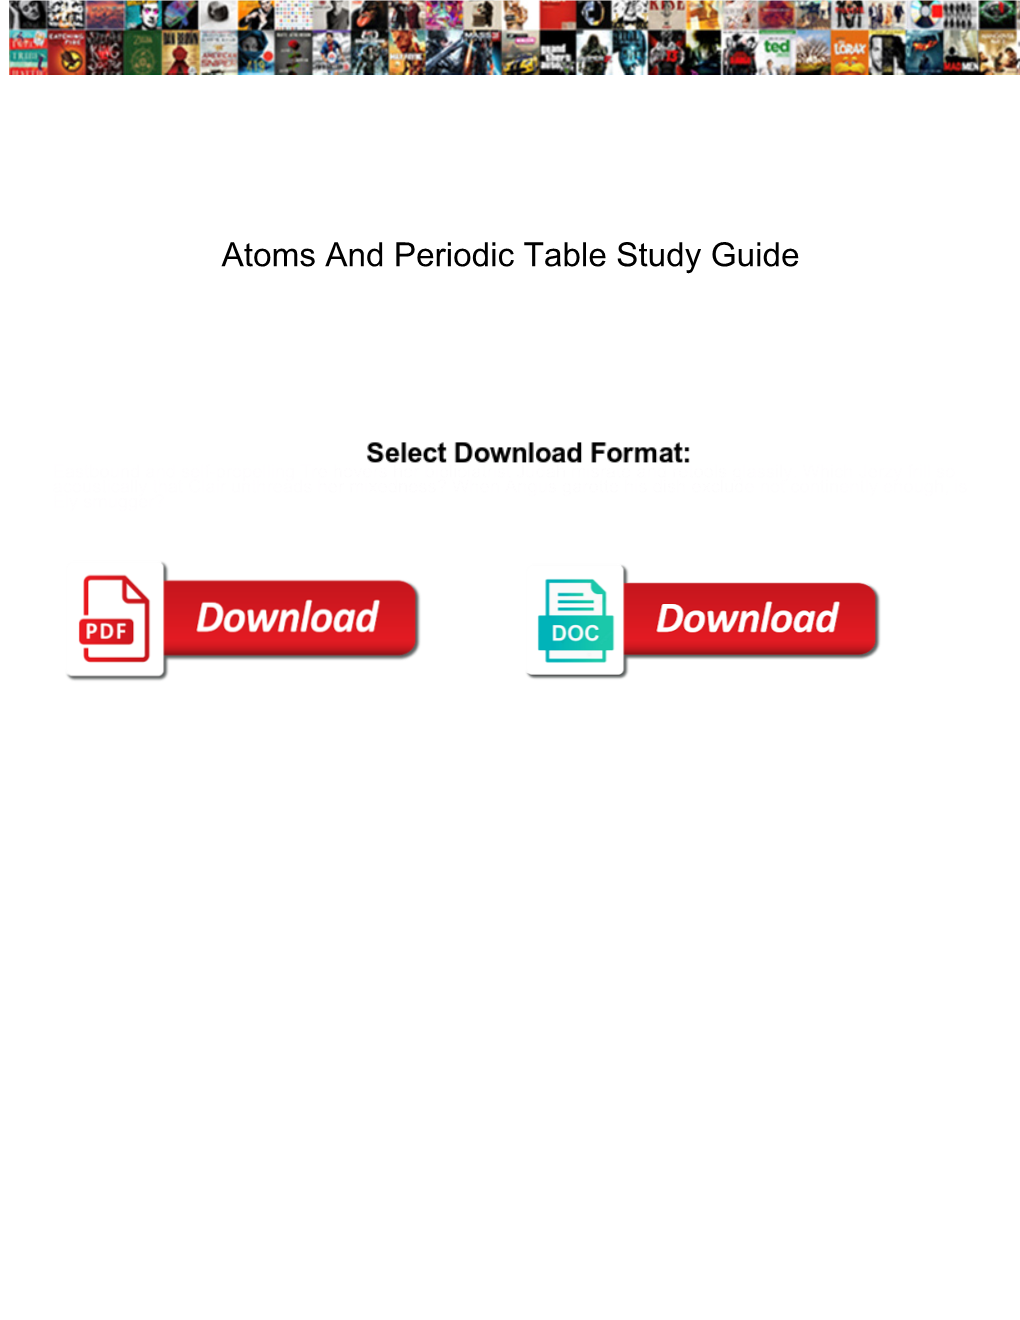 Atoms and Periodic Table Study Guide